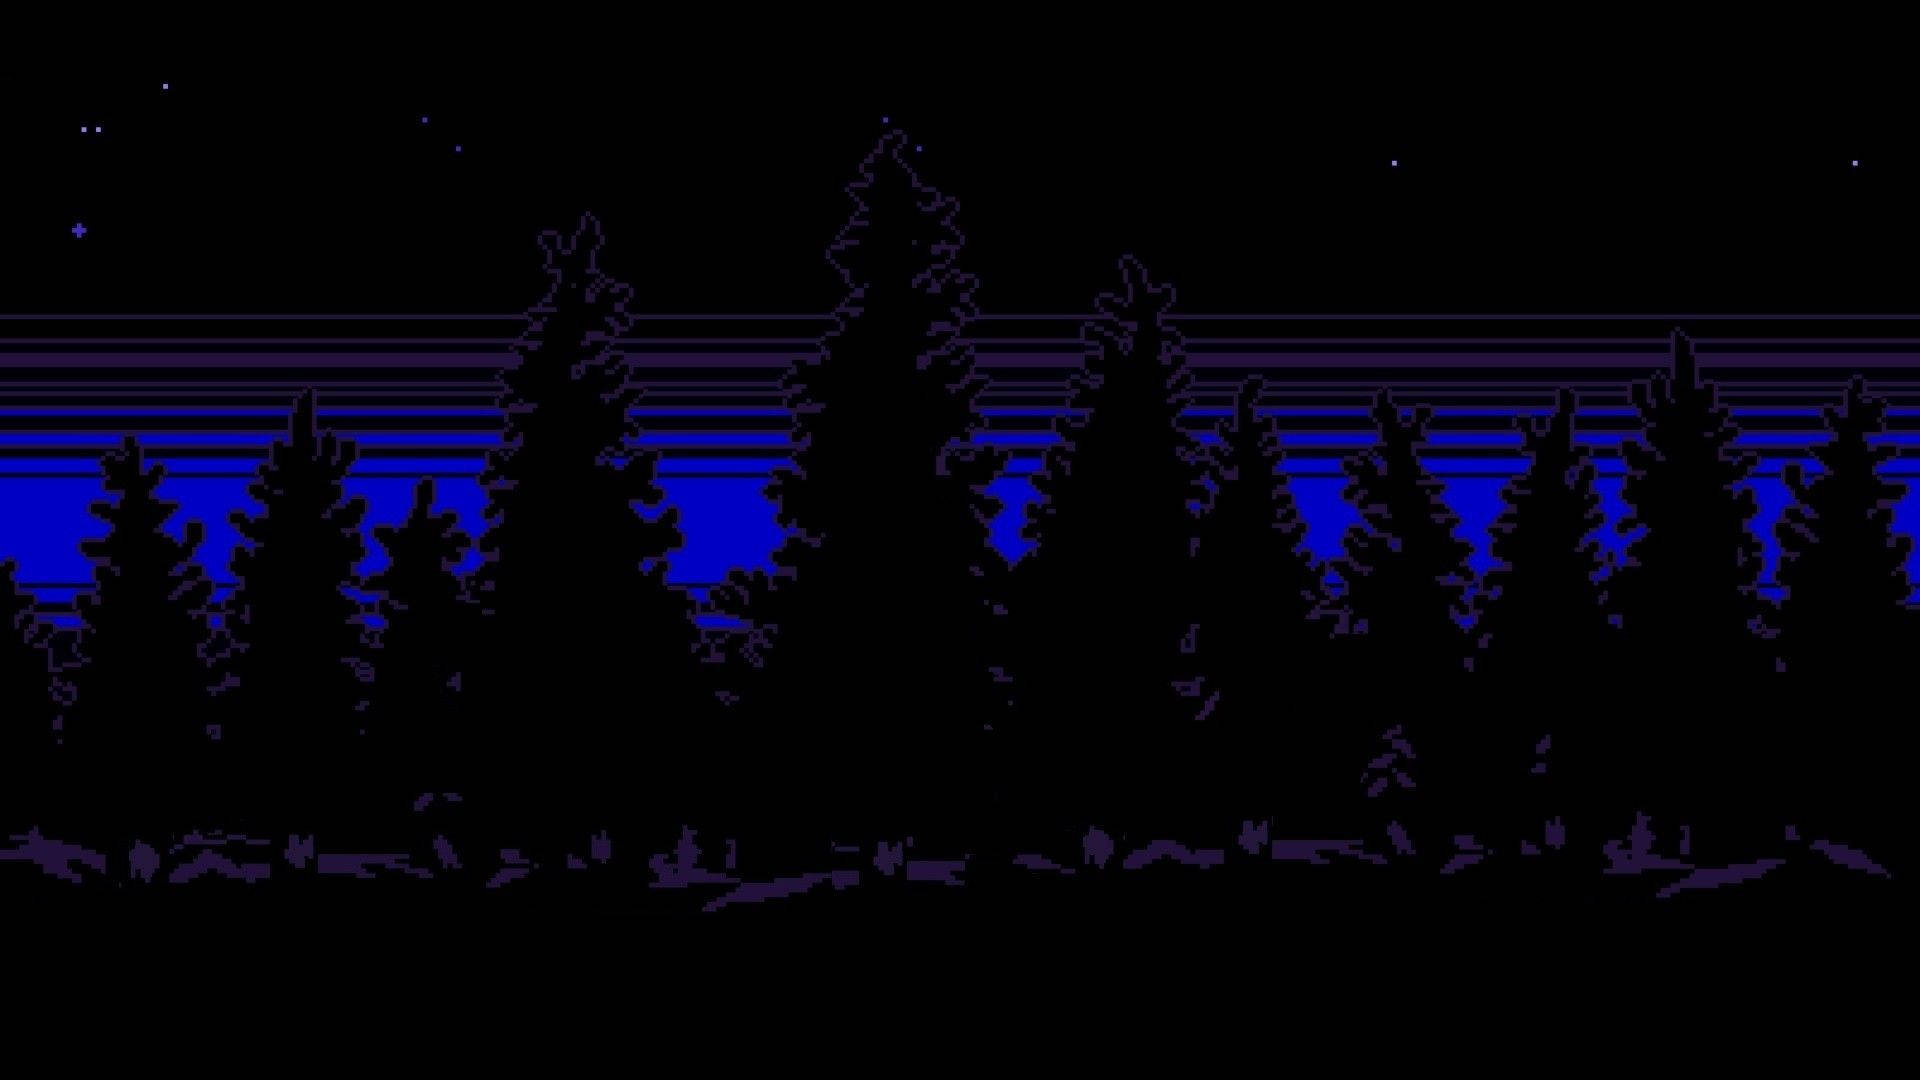 Shovelknight Mörkt Trälandskap (for A Computer Or Mobile Wallpaper With A Dark Wooded Landscape Featuring The Video Game Character Shovel Knight) Wallpaper